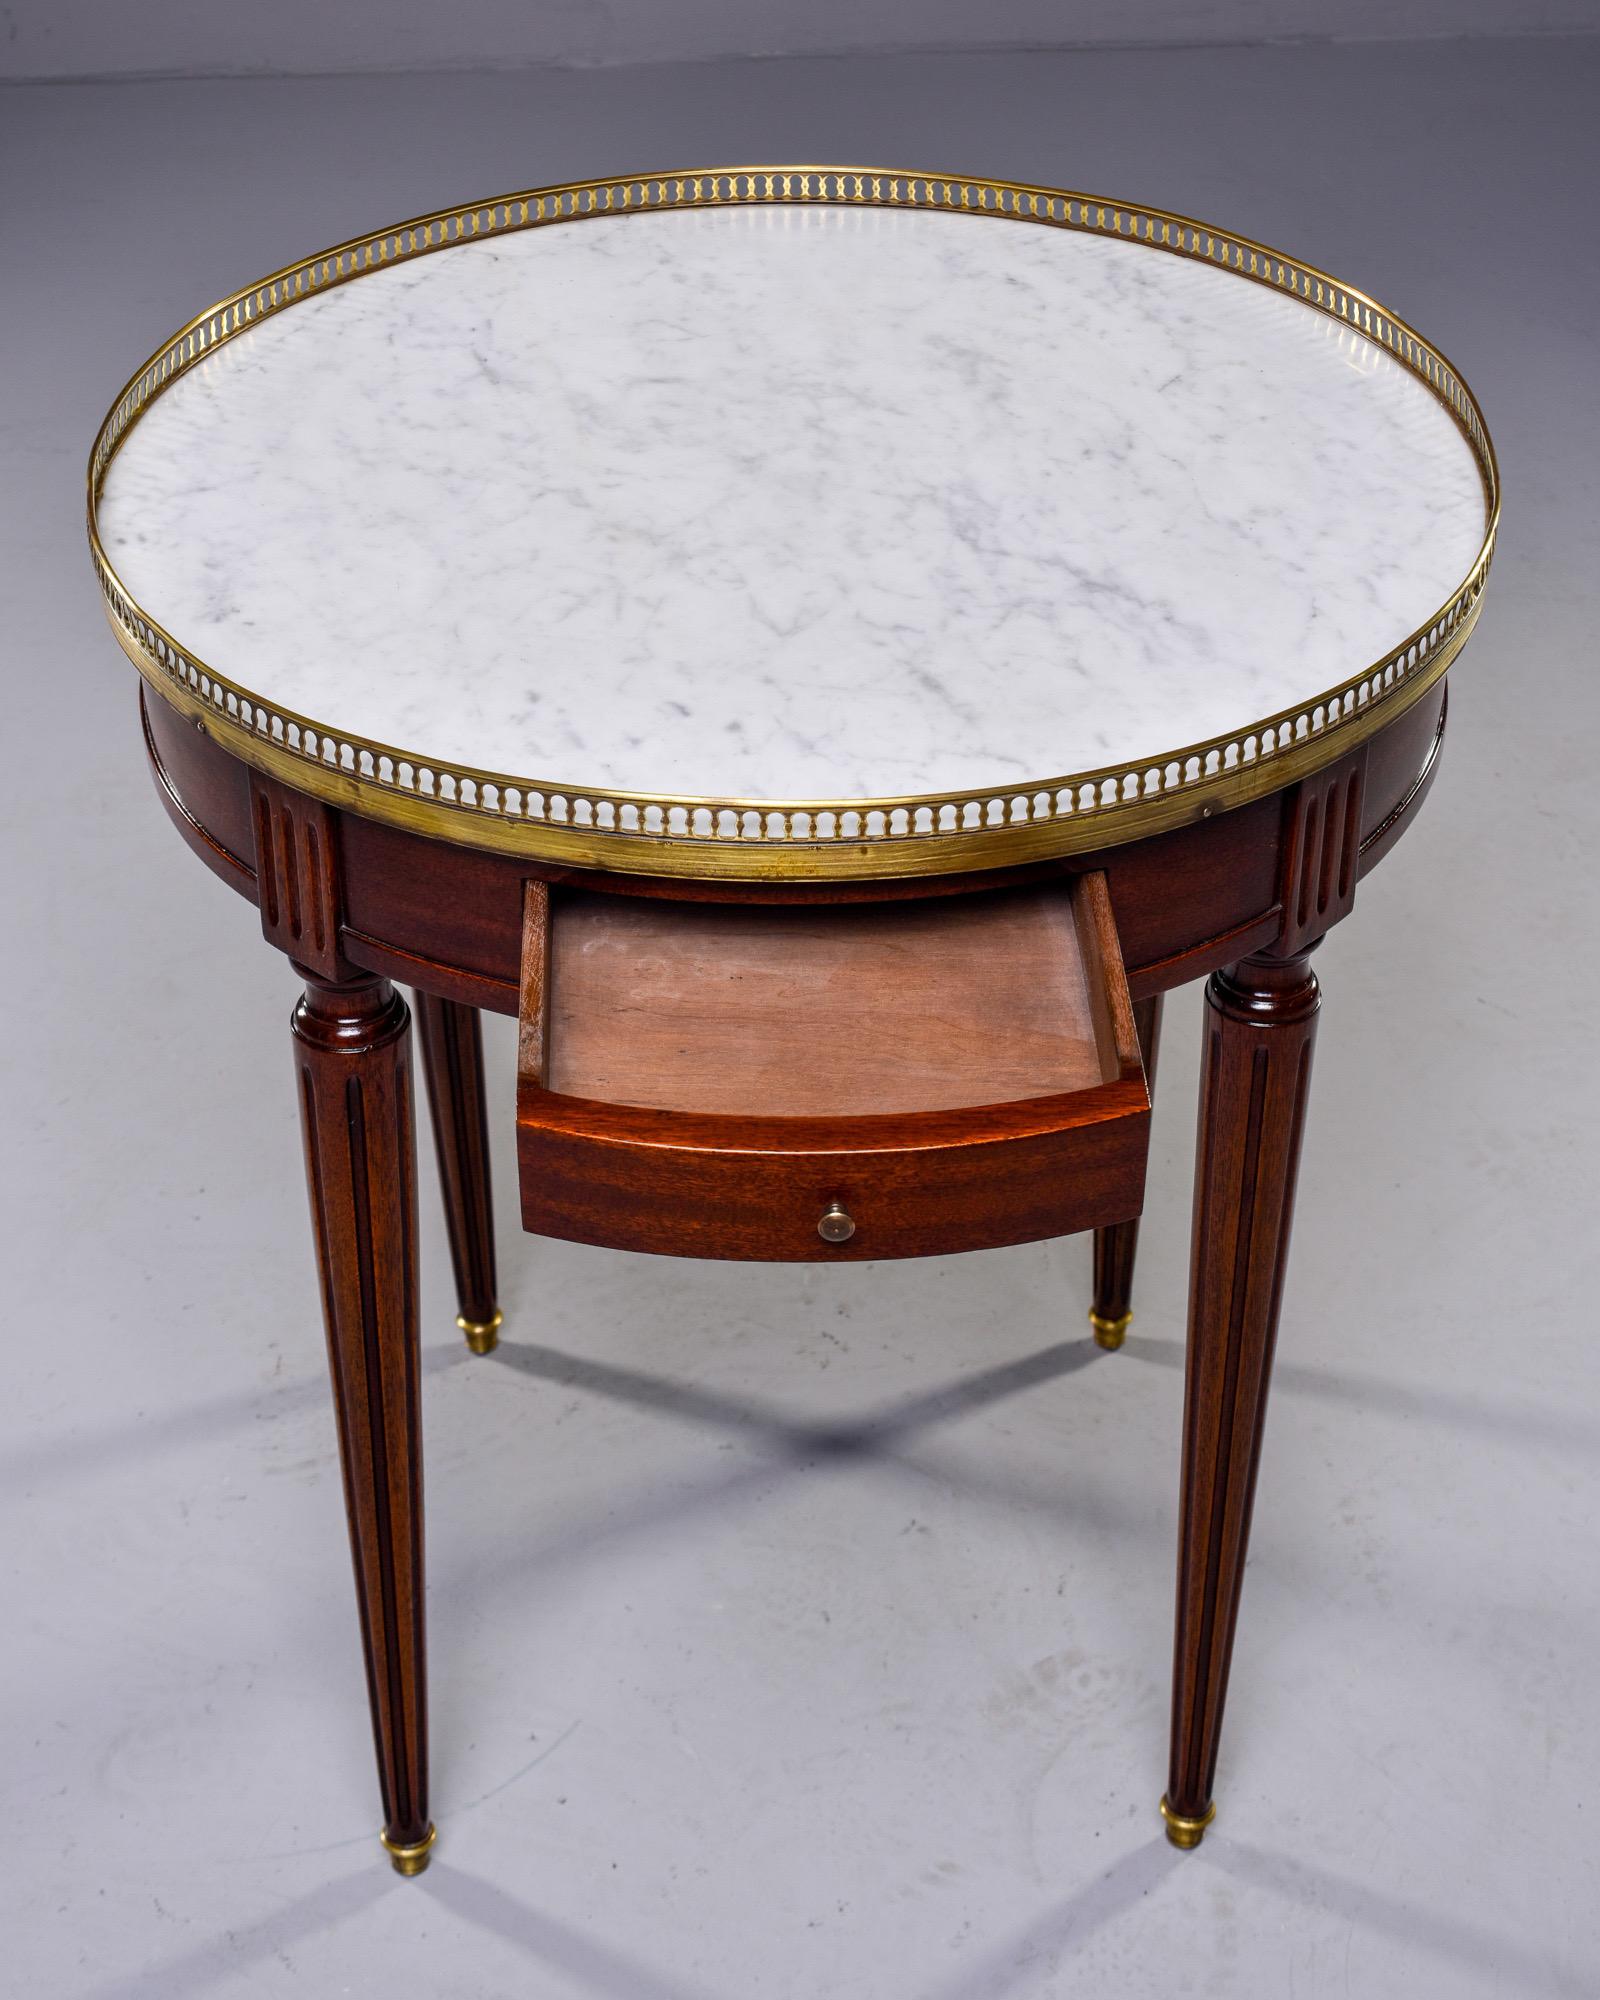 French Louis XVI Style Brass Bound Table with White Marble Top